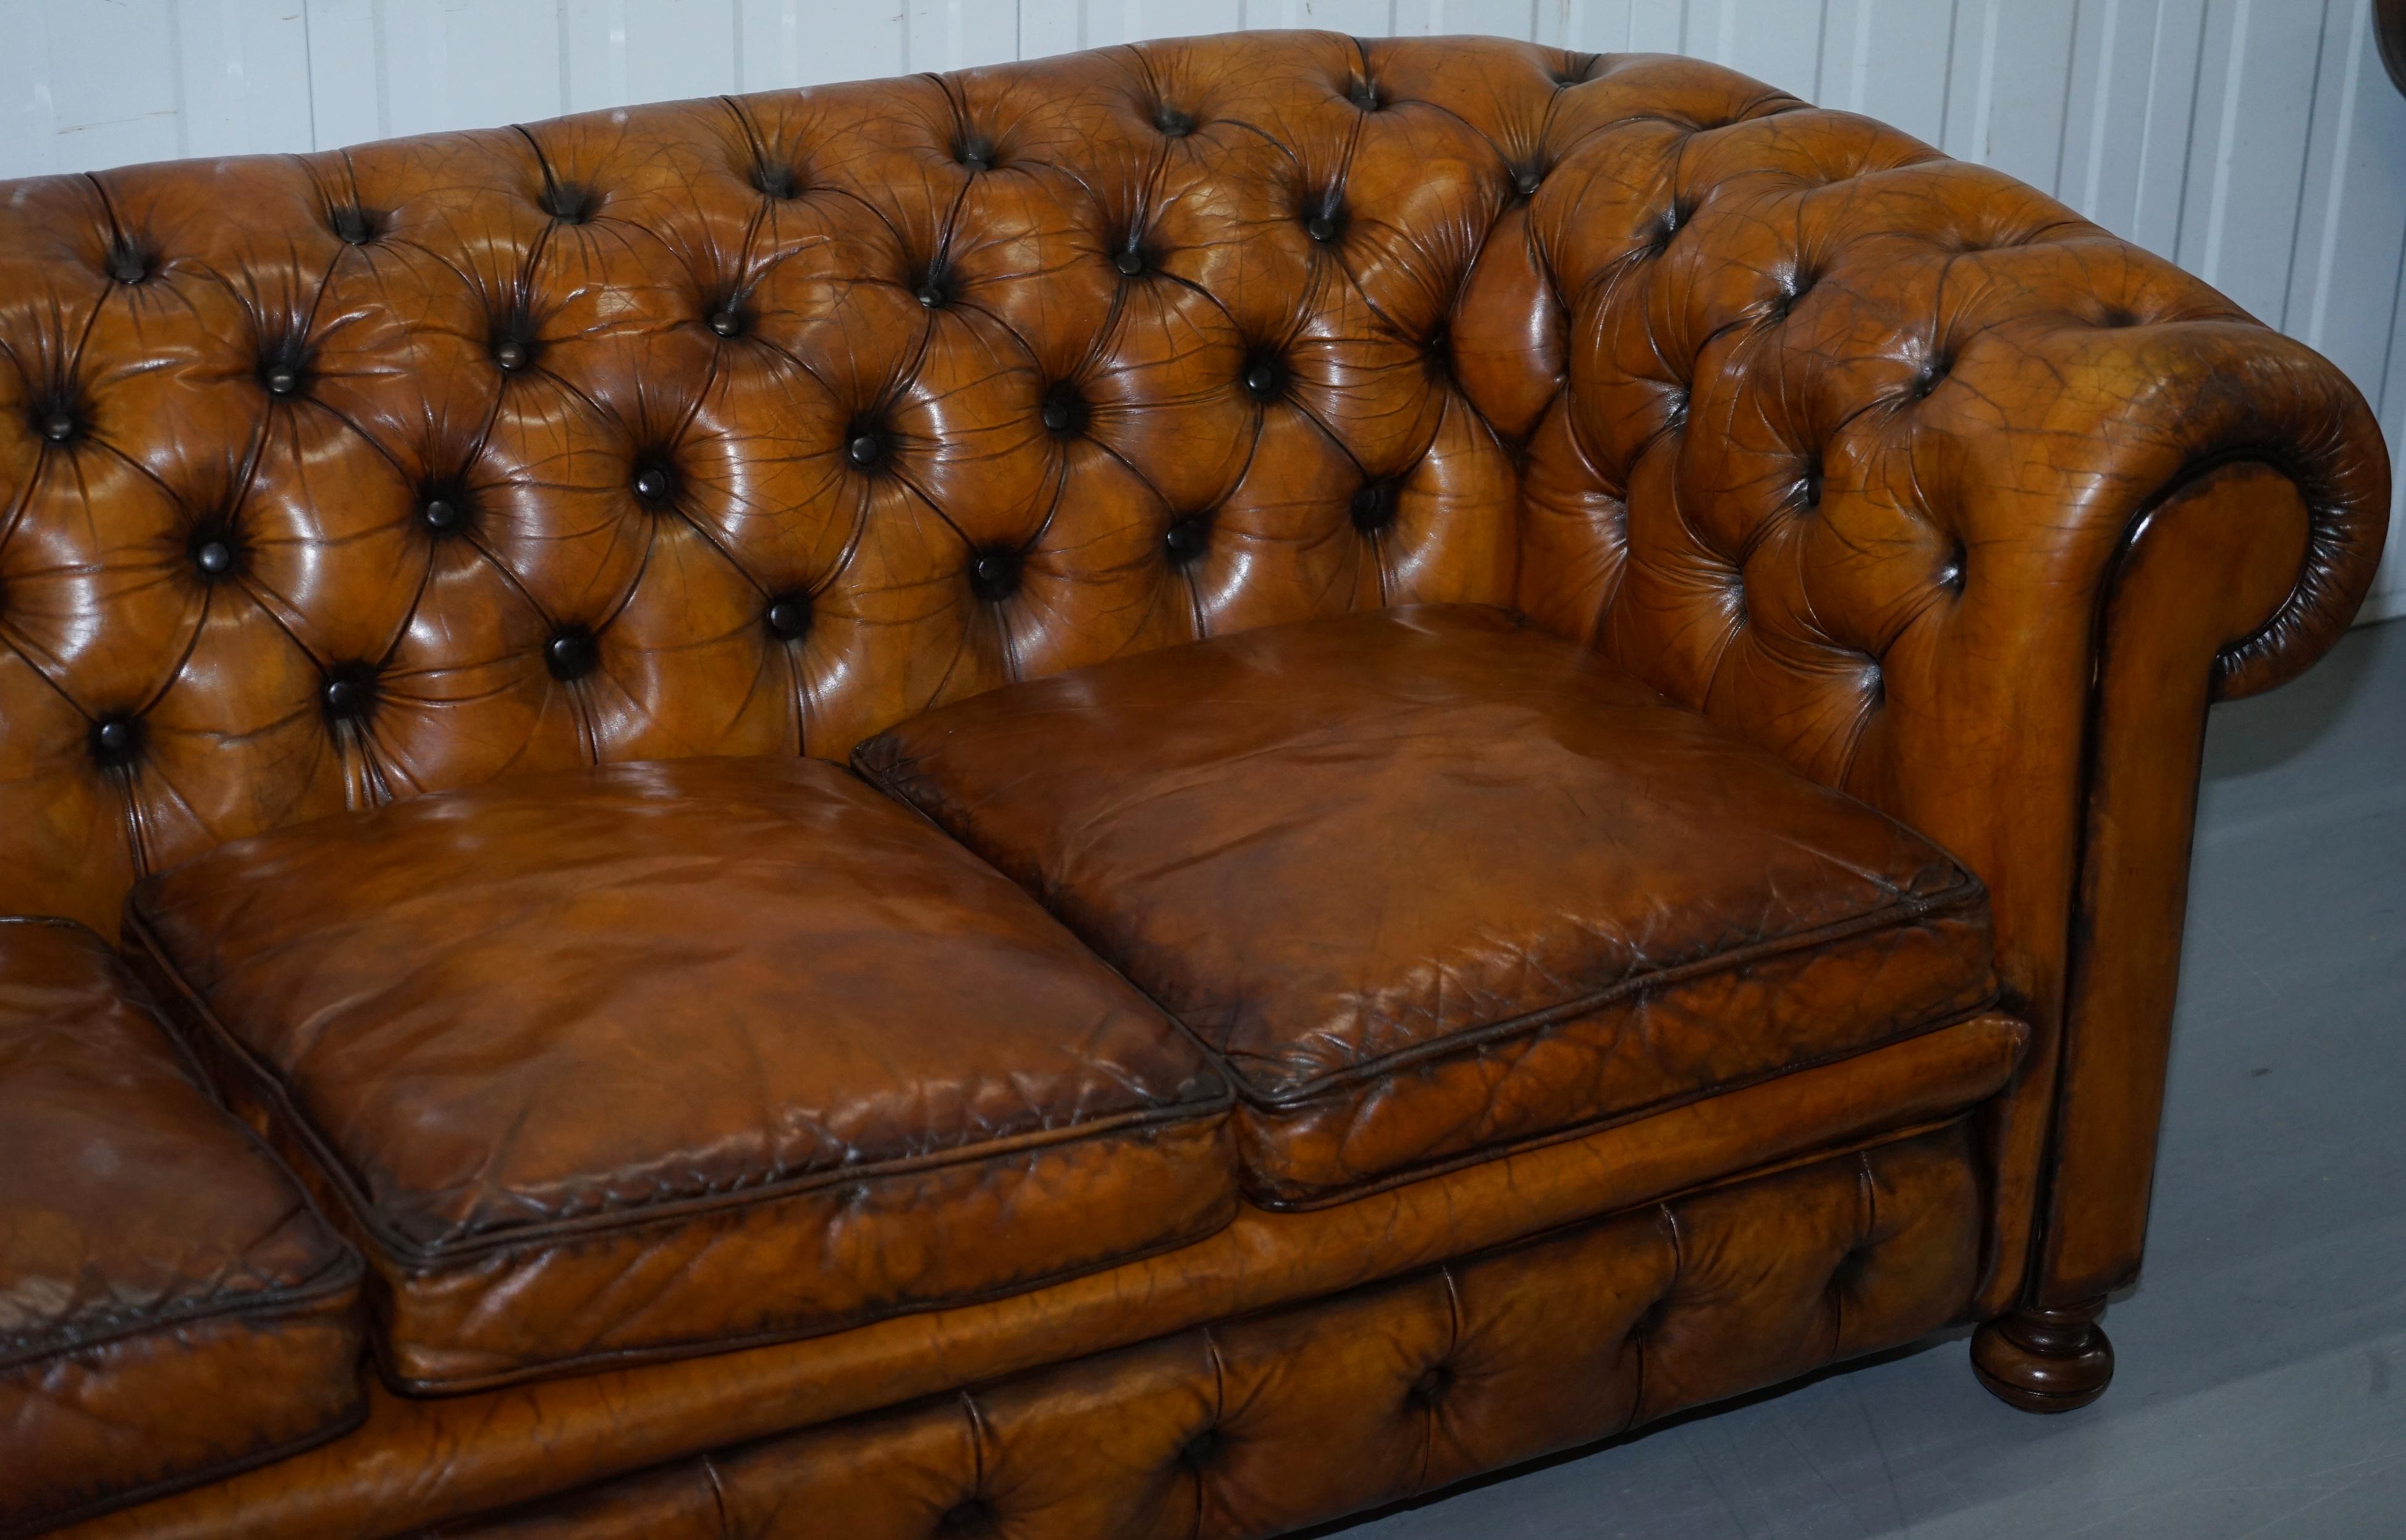 what cushions on brown leather sofa